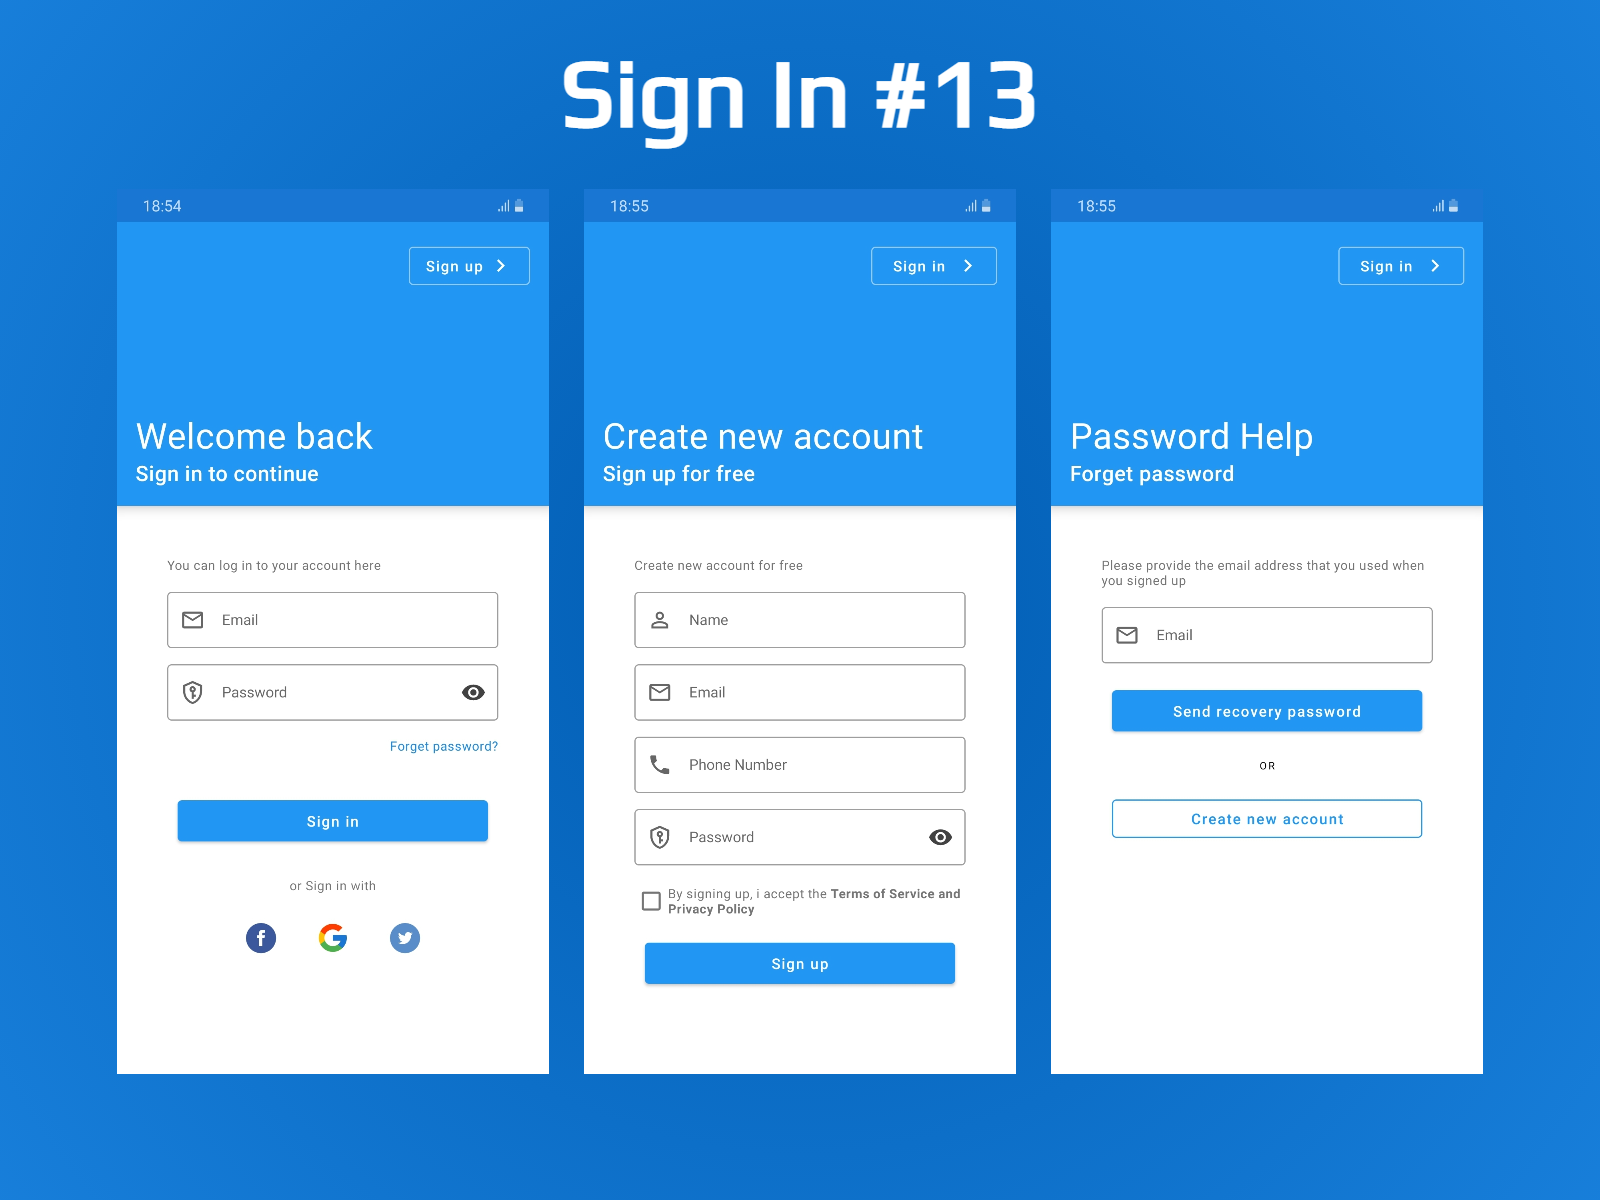 Sign In Material Design Template by Javax West on Dribbble